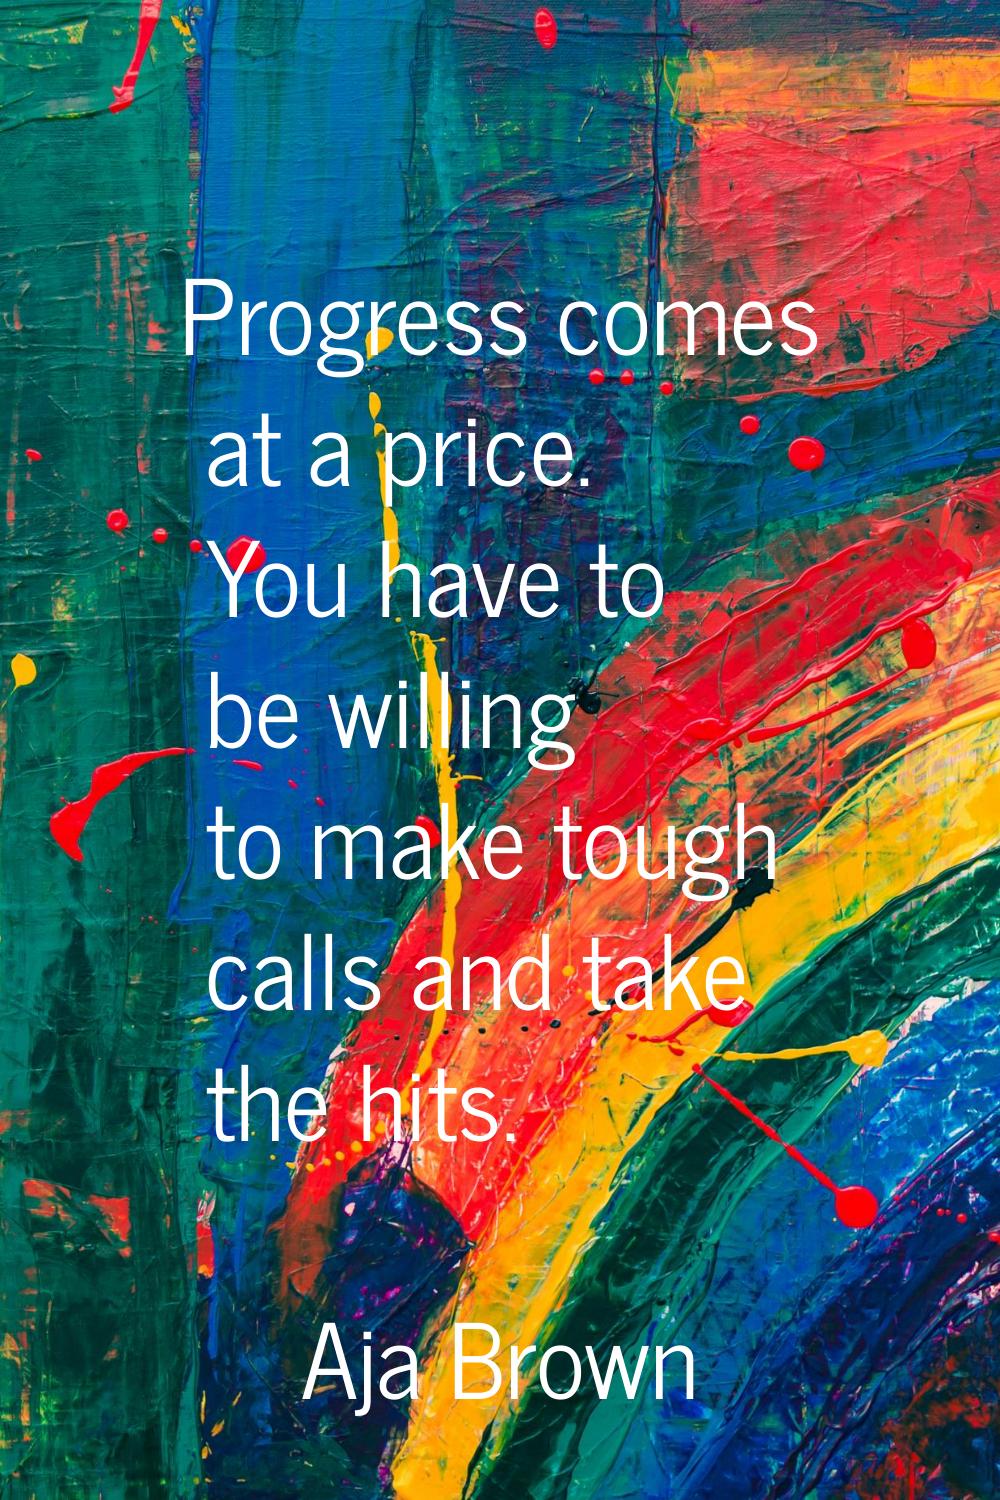 Progress comes at a price. You have to be willing to make tough calls and take the hits.